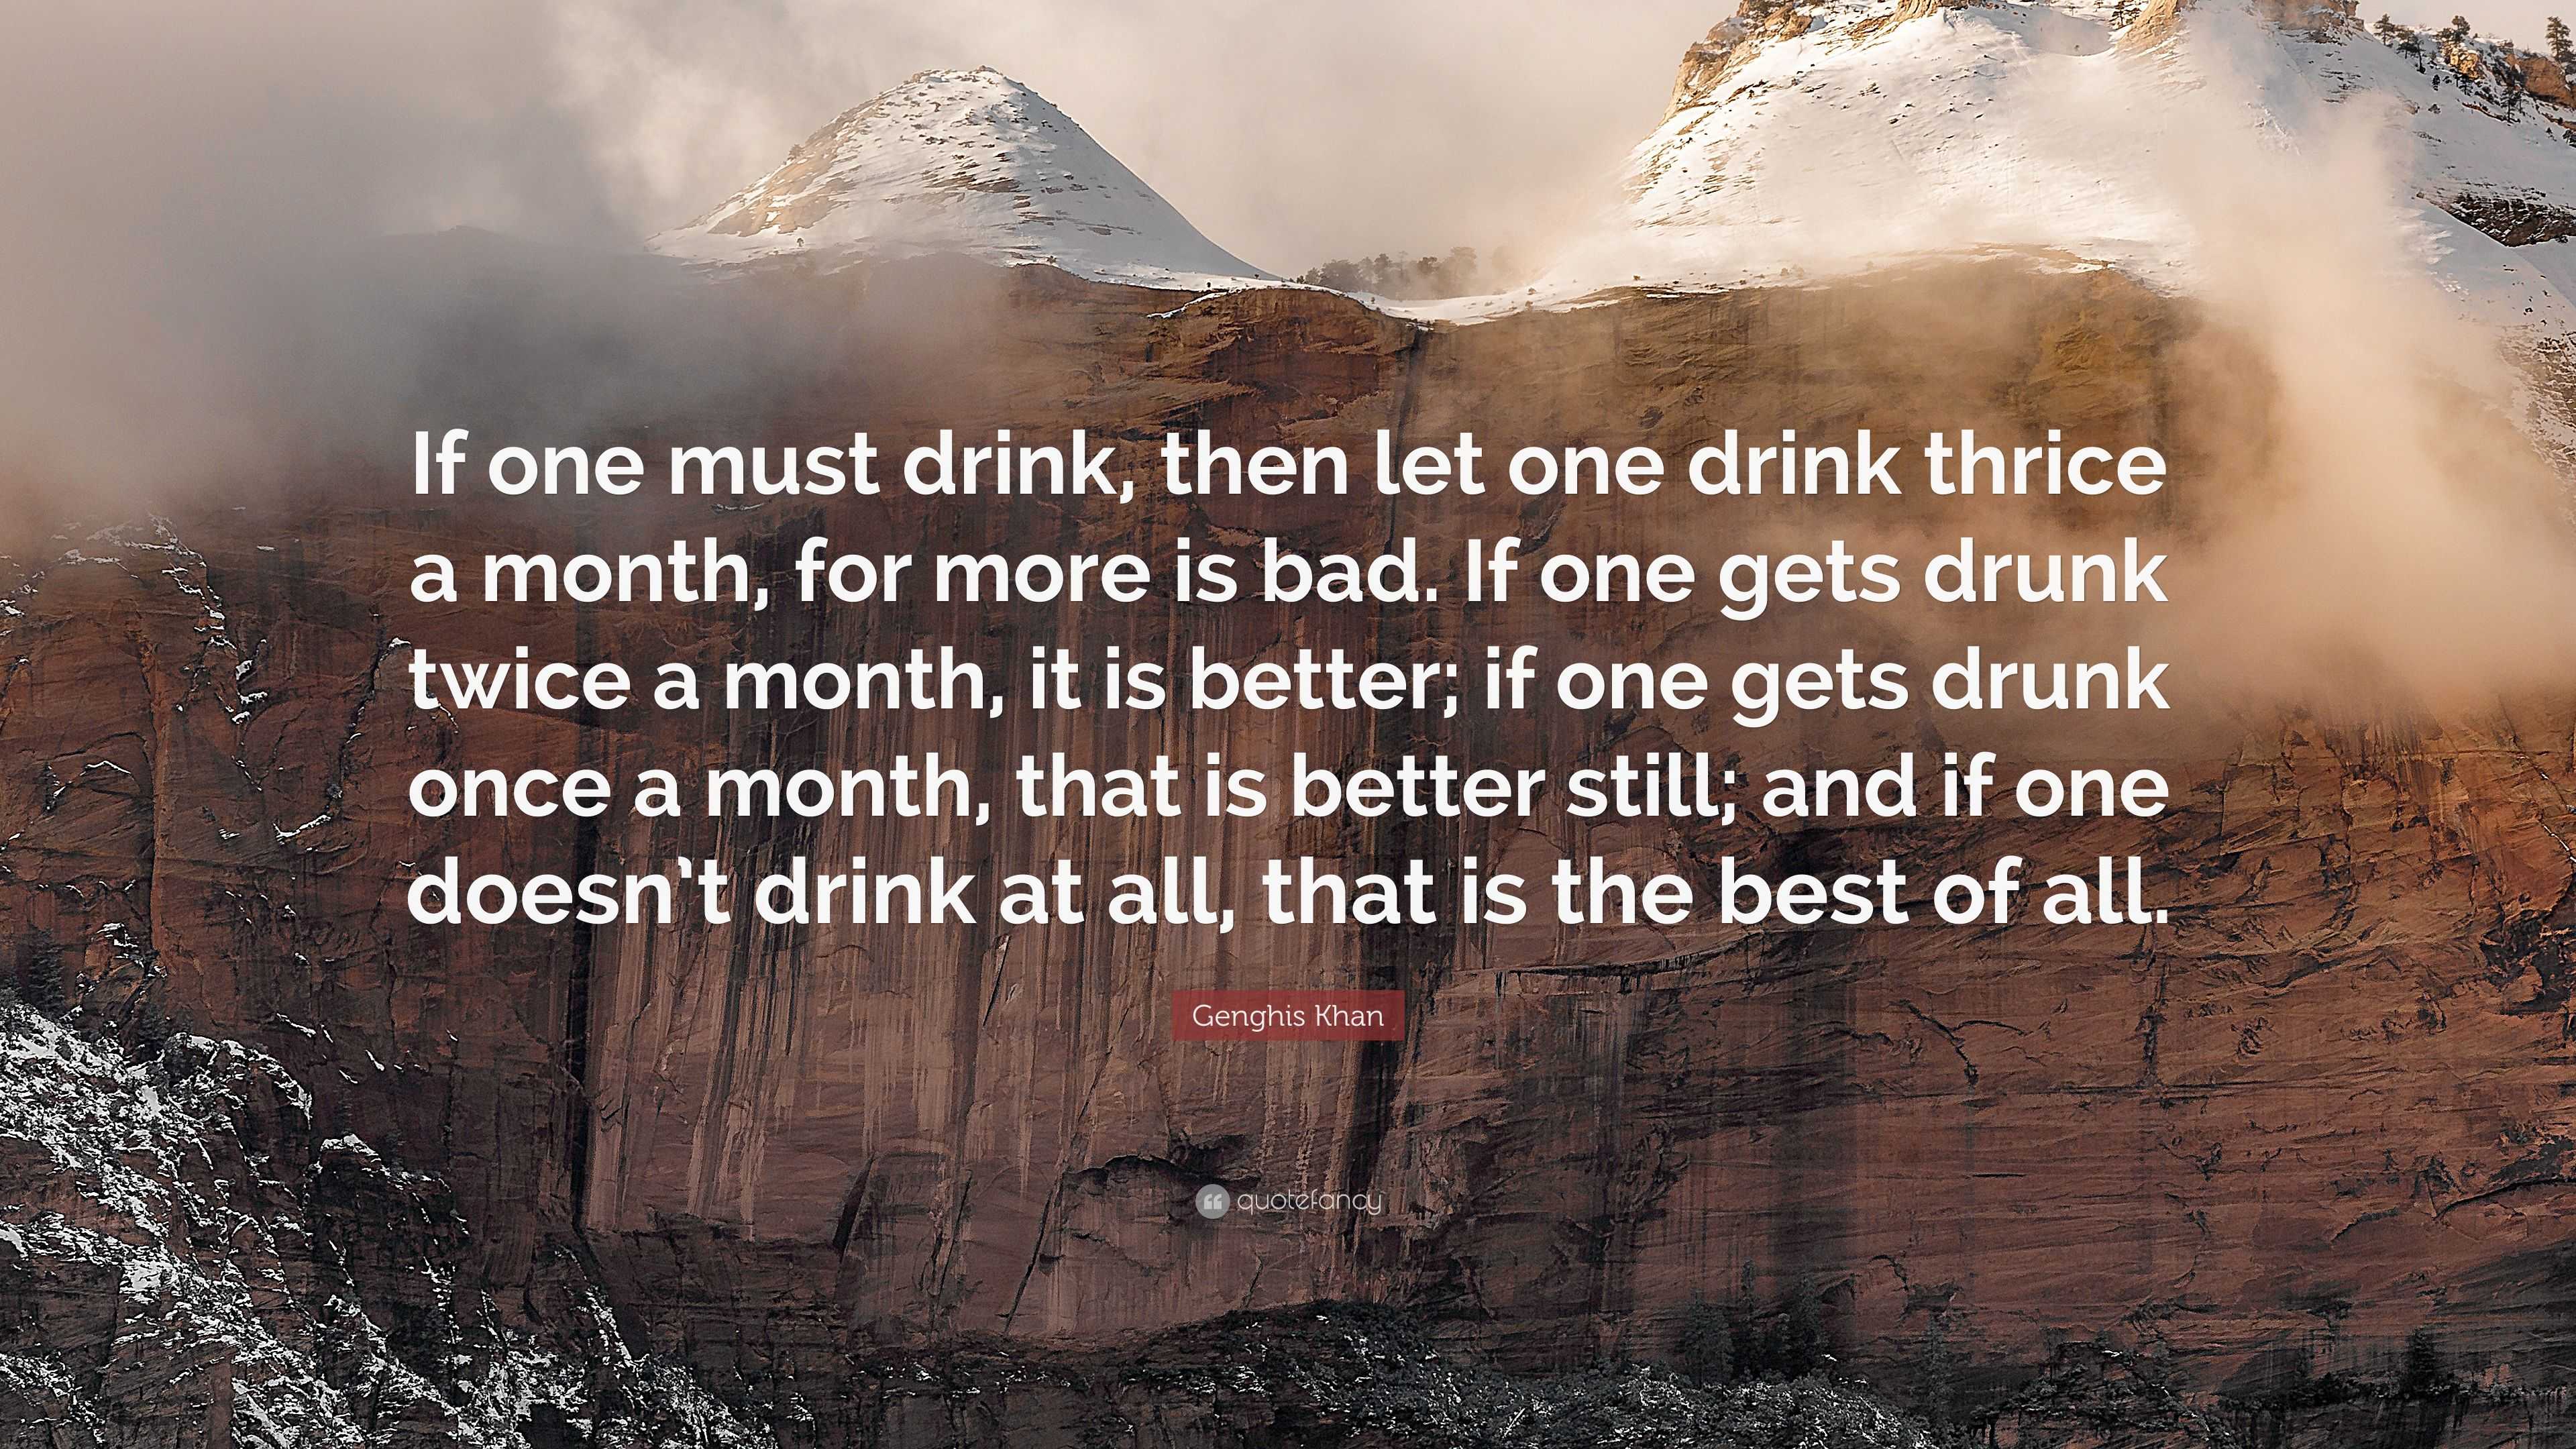 Genghis Khan Quote: “If one must drink, then let one drink thrice a